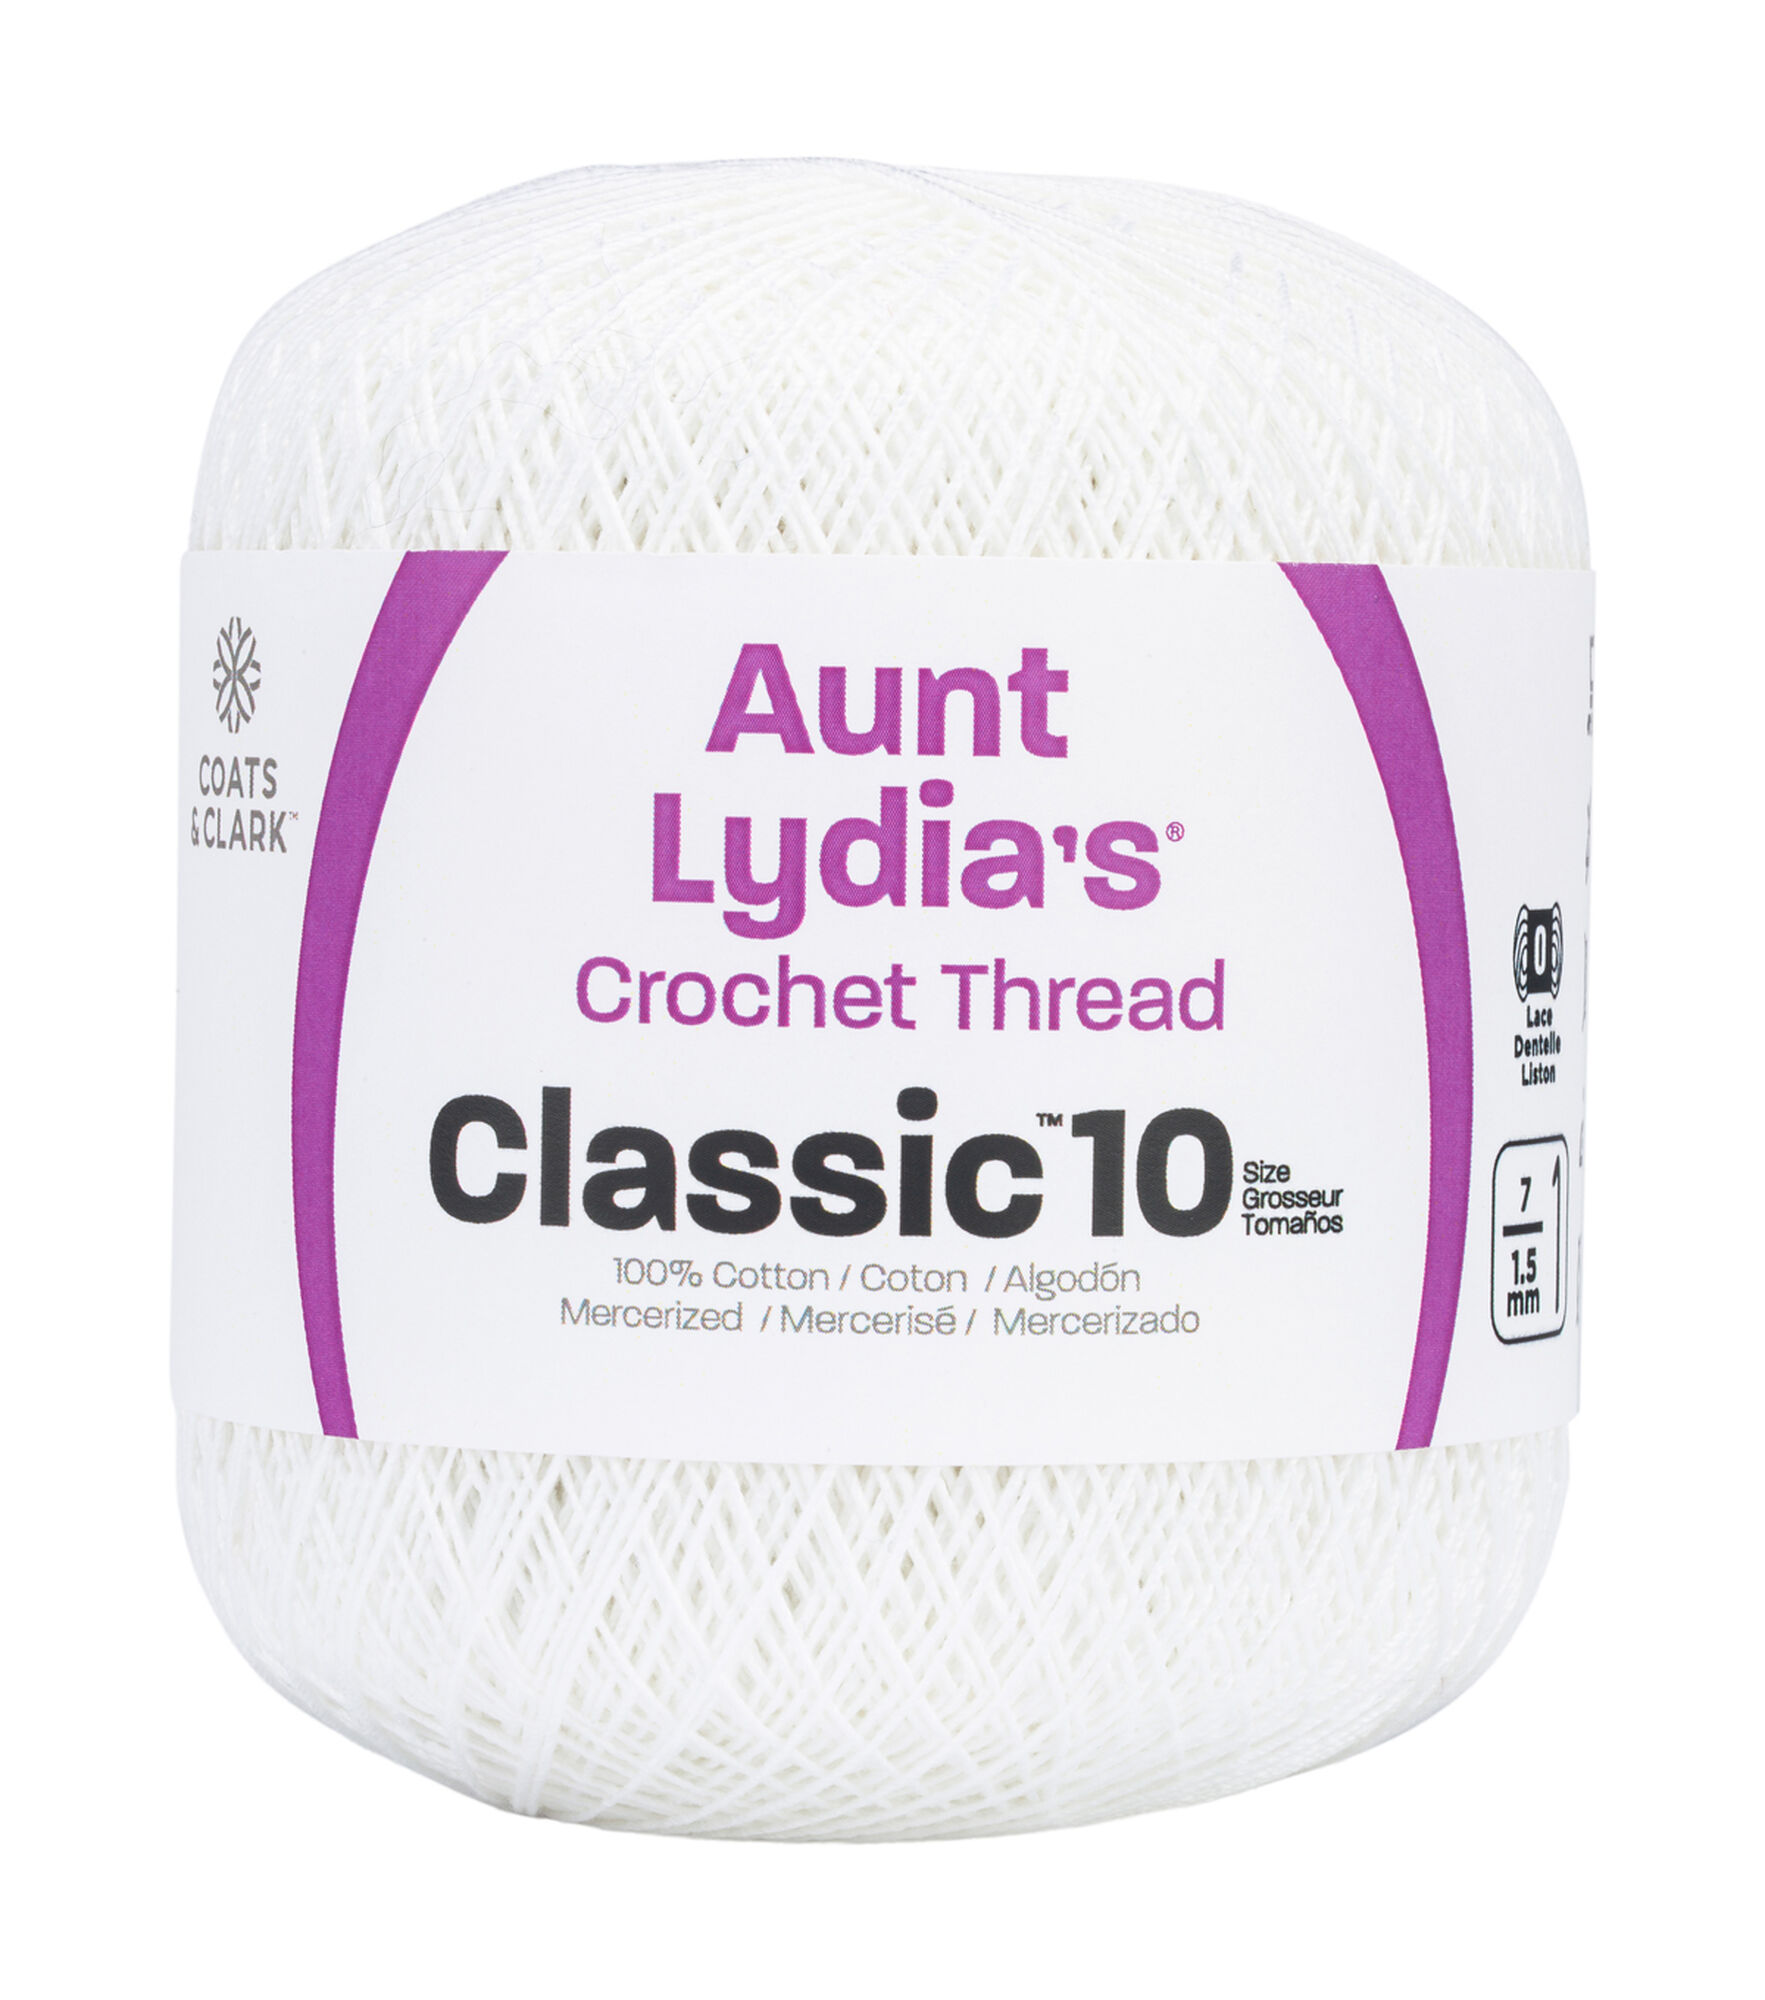 Aunt Lydia's Classic Cotton Crochet Thread, Size 10 - Hot Pink